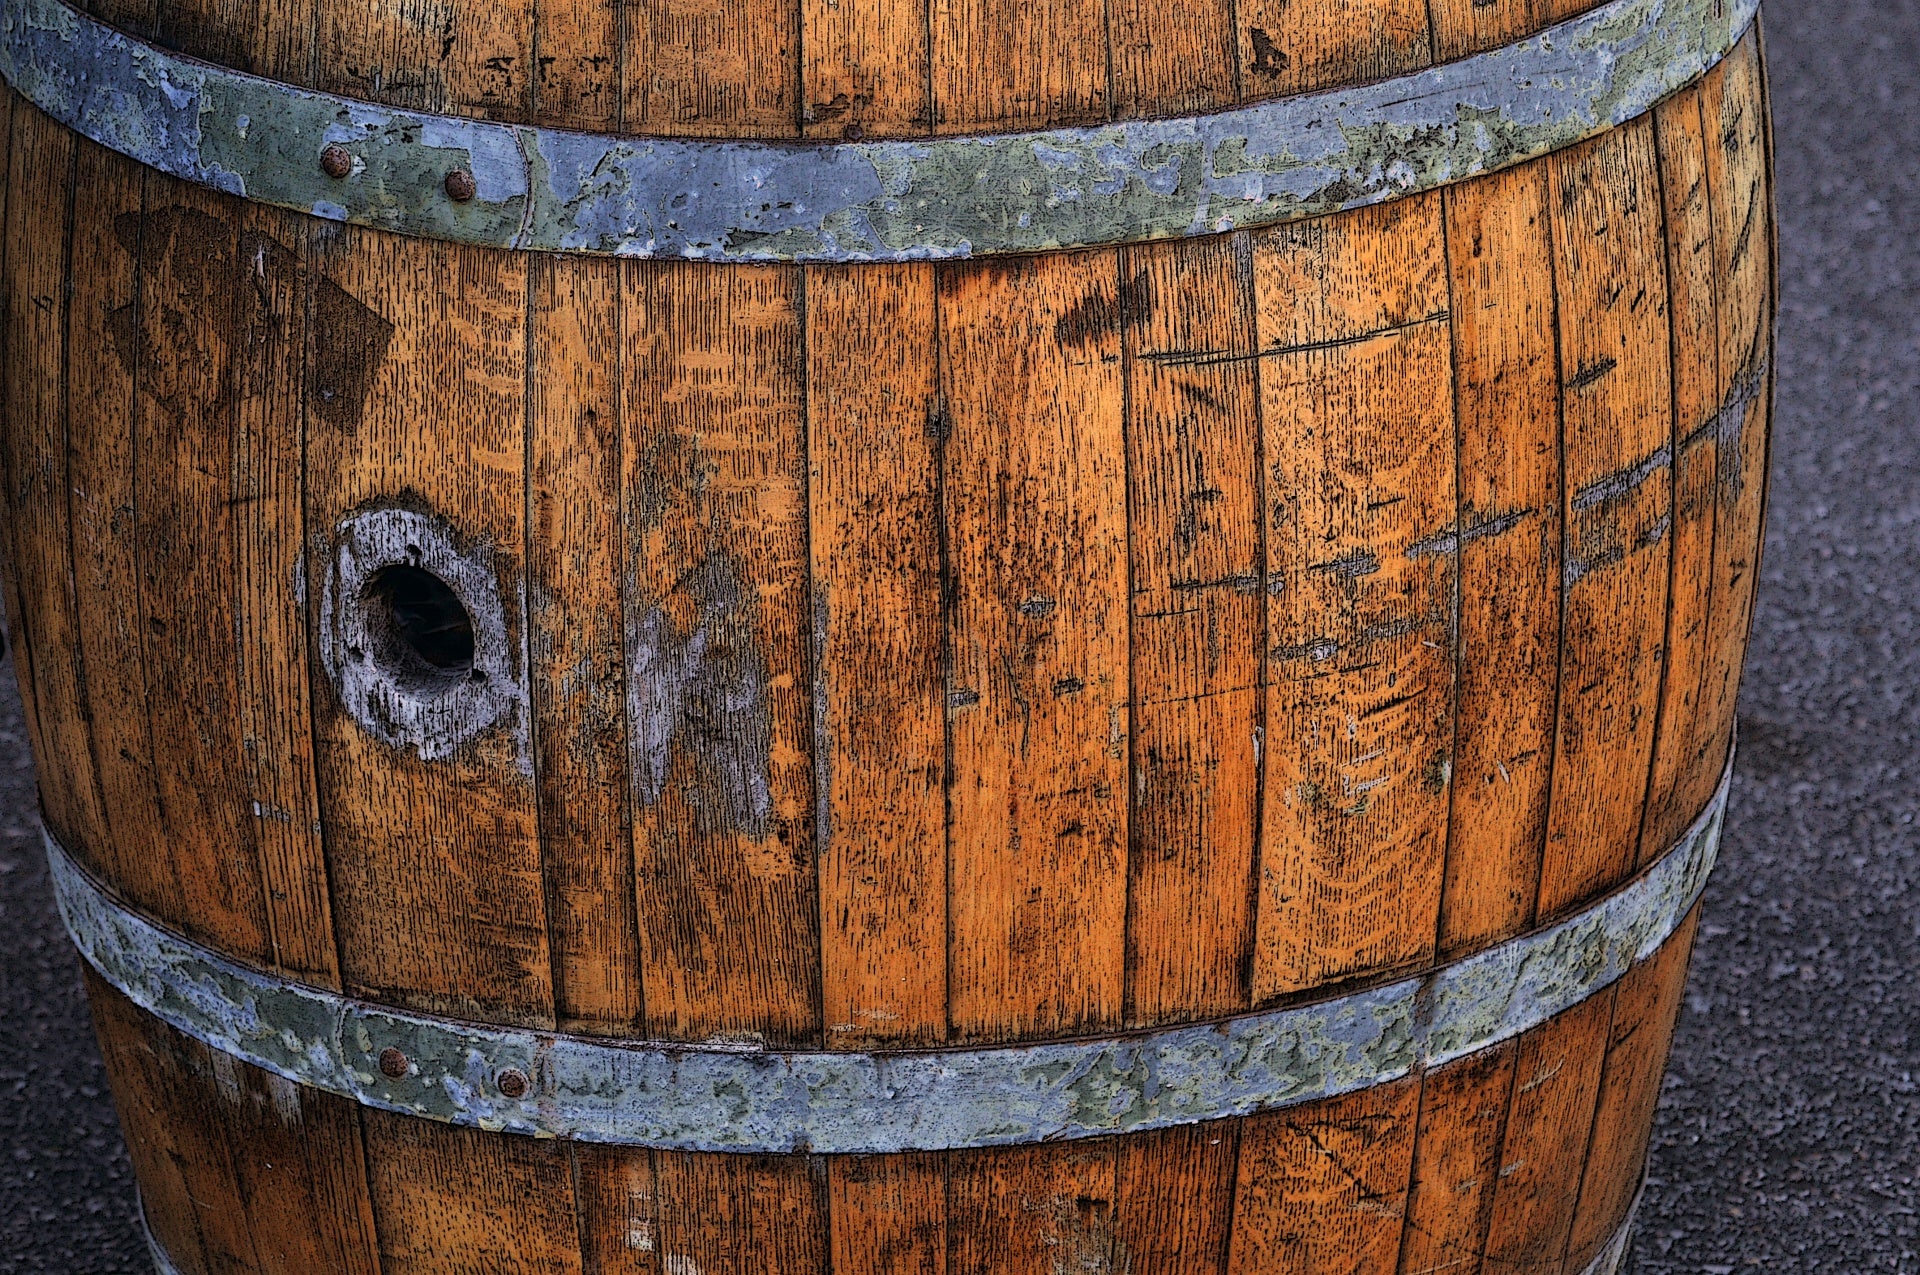 How Are Whiskey Barrels Made?